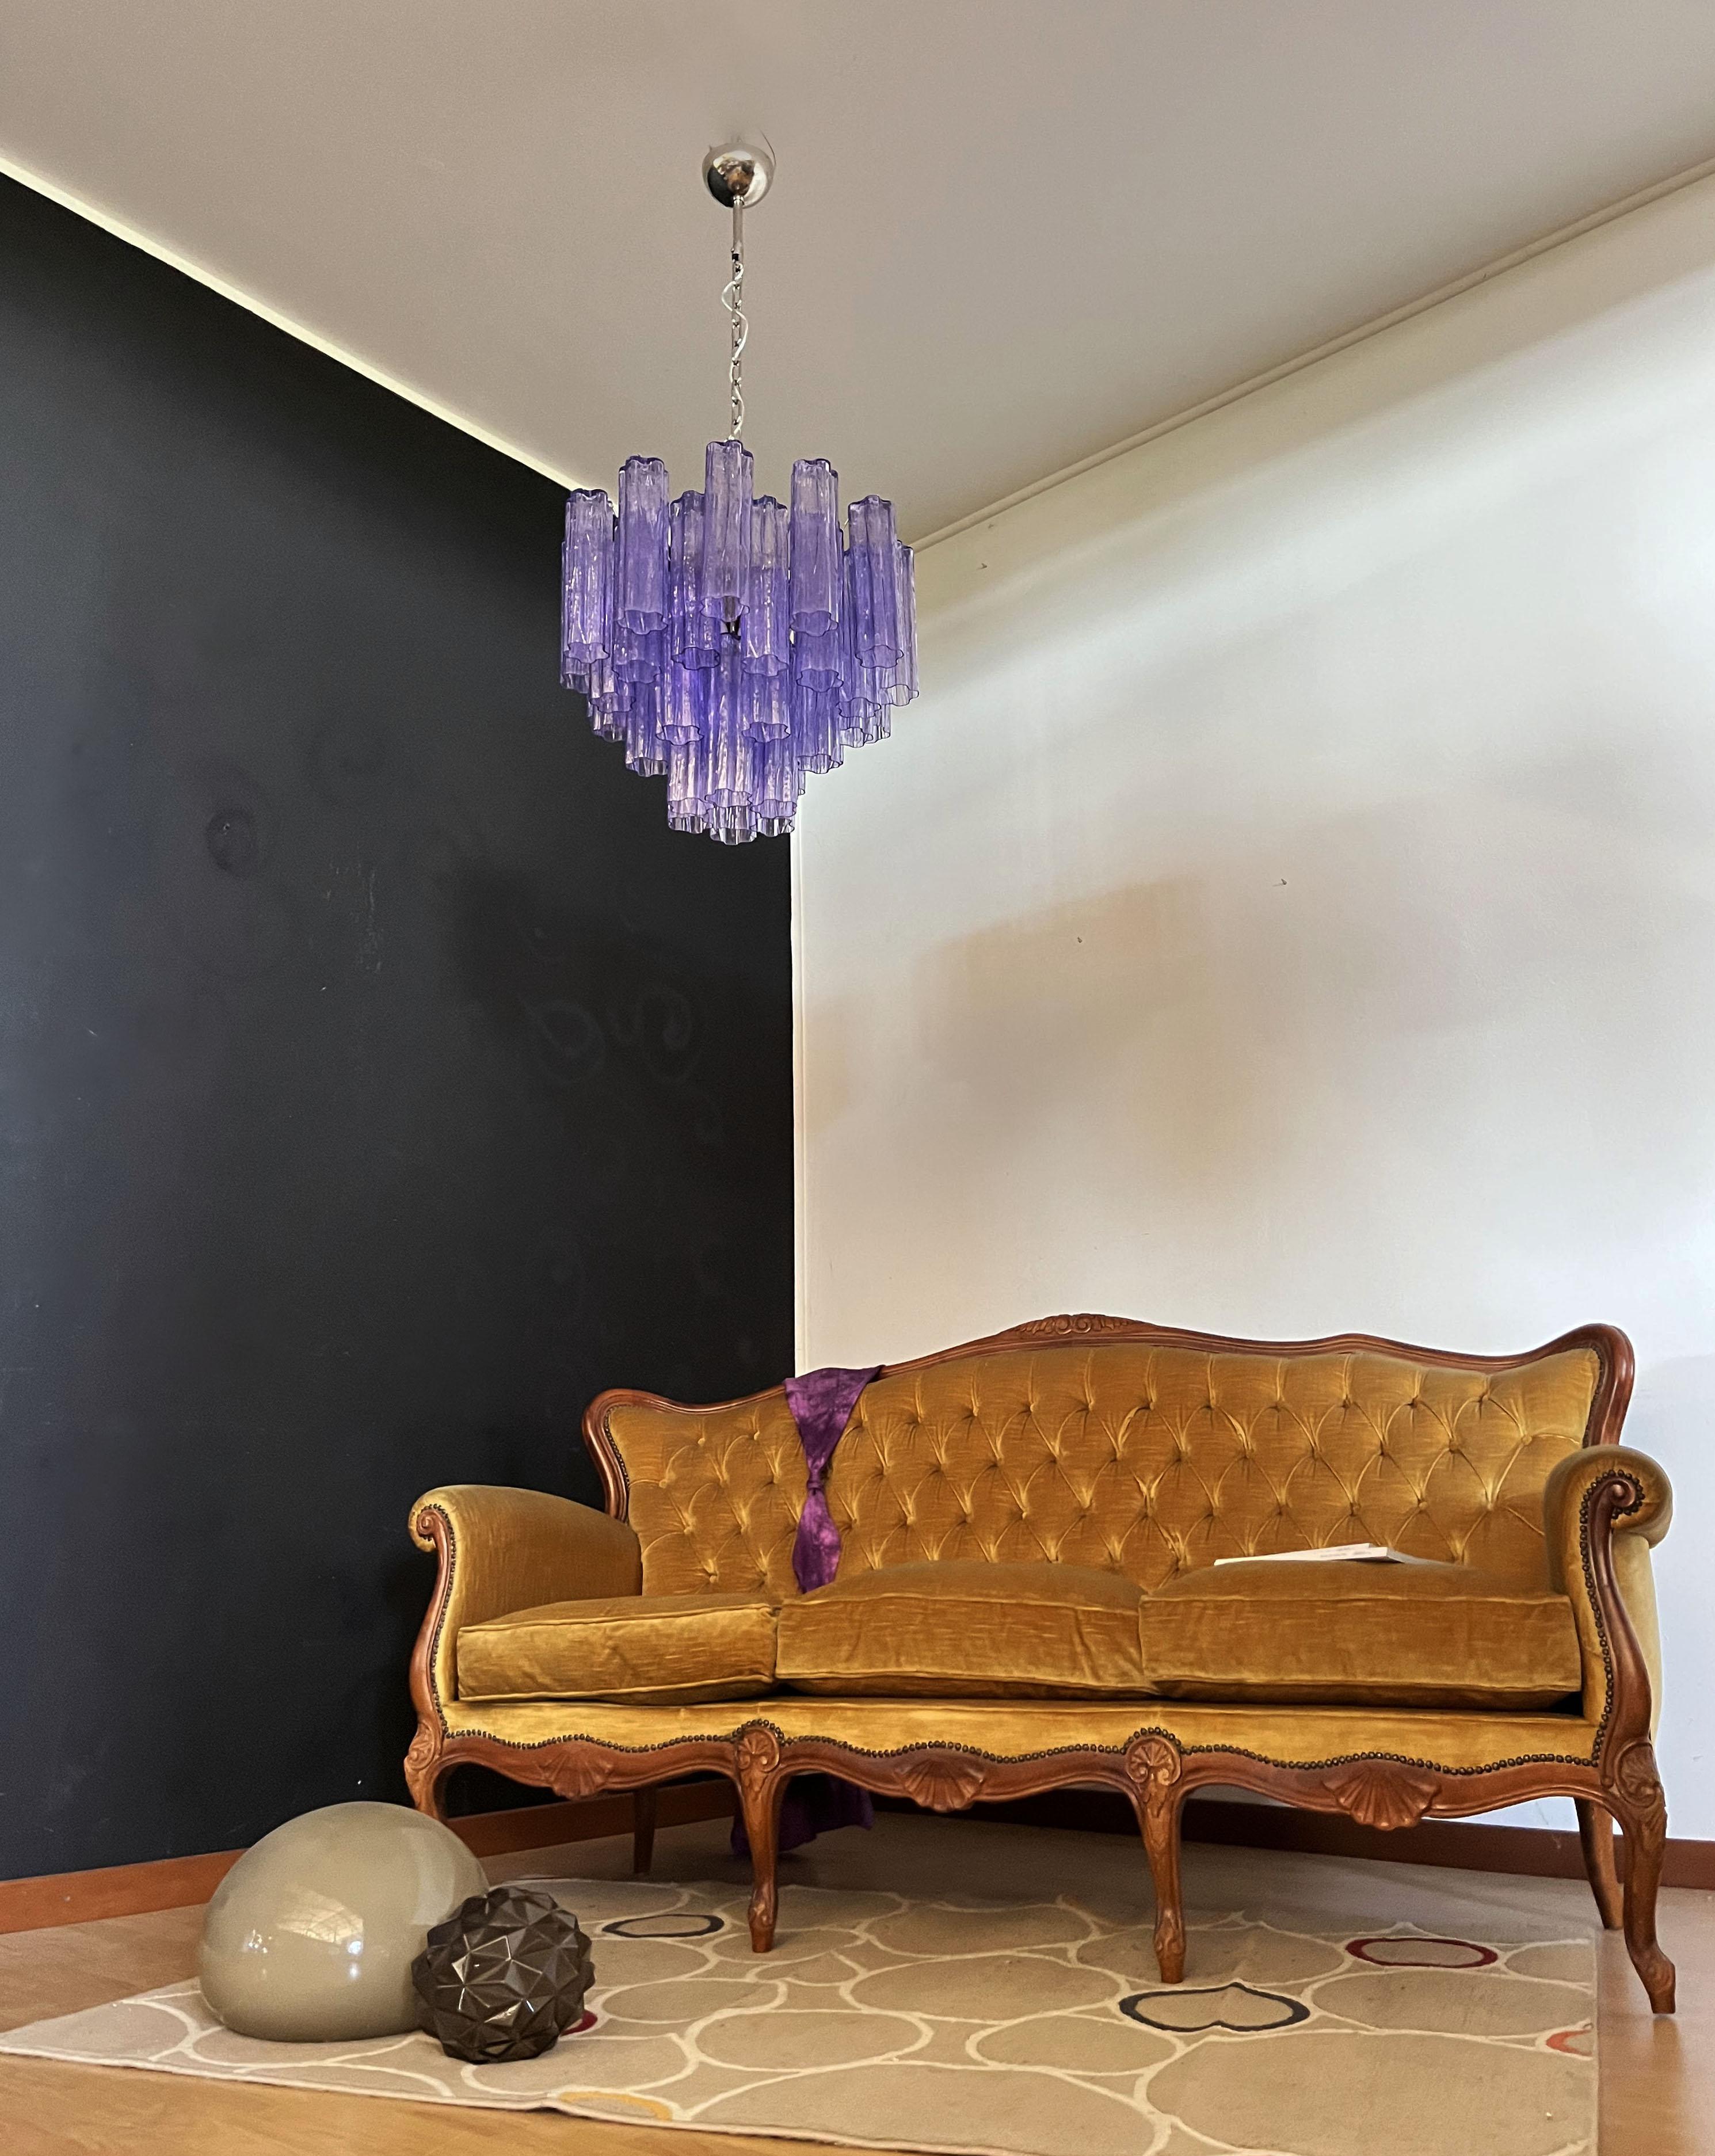 Italian vintage chandelier in Murano glass and nickel-plated metal structure. The armor polished nickel supports 36 large amethyst glass tubes in a star shape.
Period: late XX century
Dimensions: 45,30 inches (115 cm) height with chain; 19,70